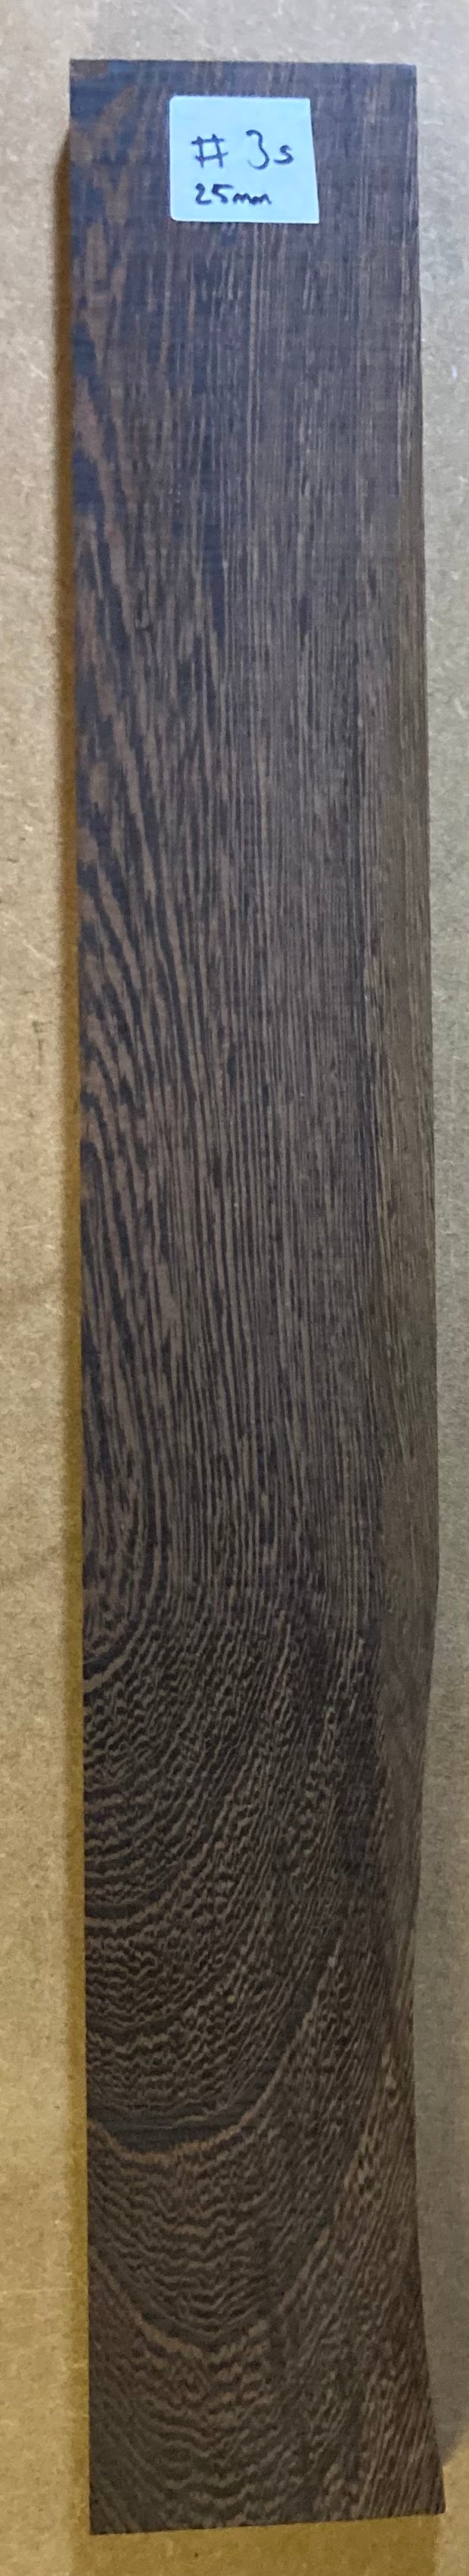 Electric Neck Blank - Wenge #3 Second